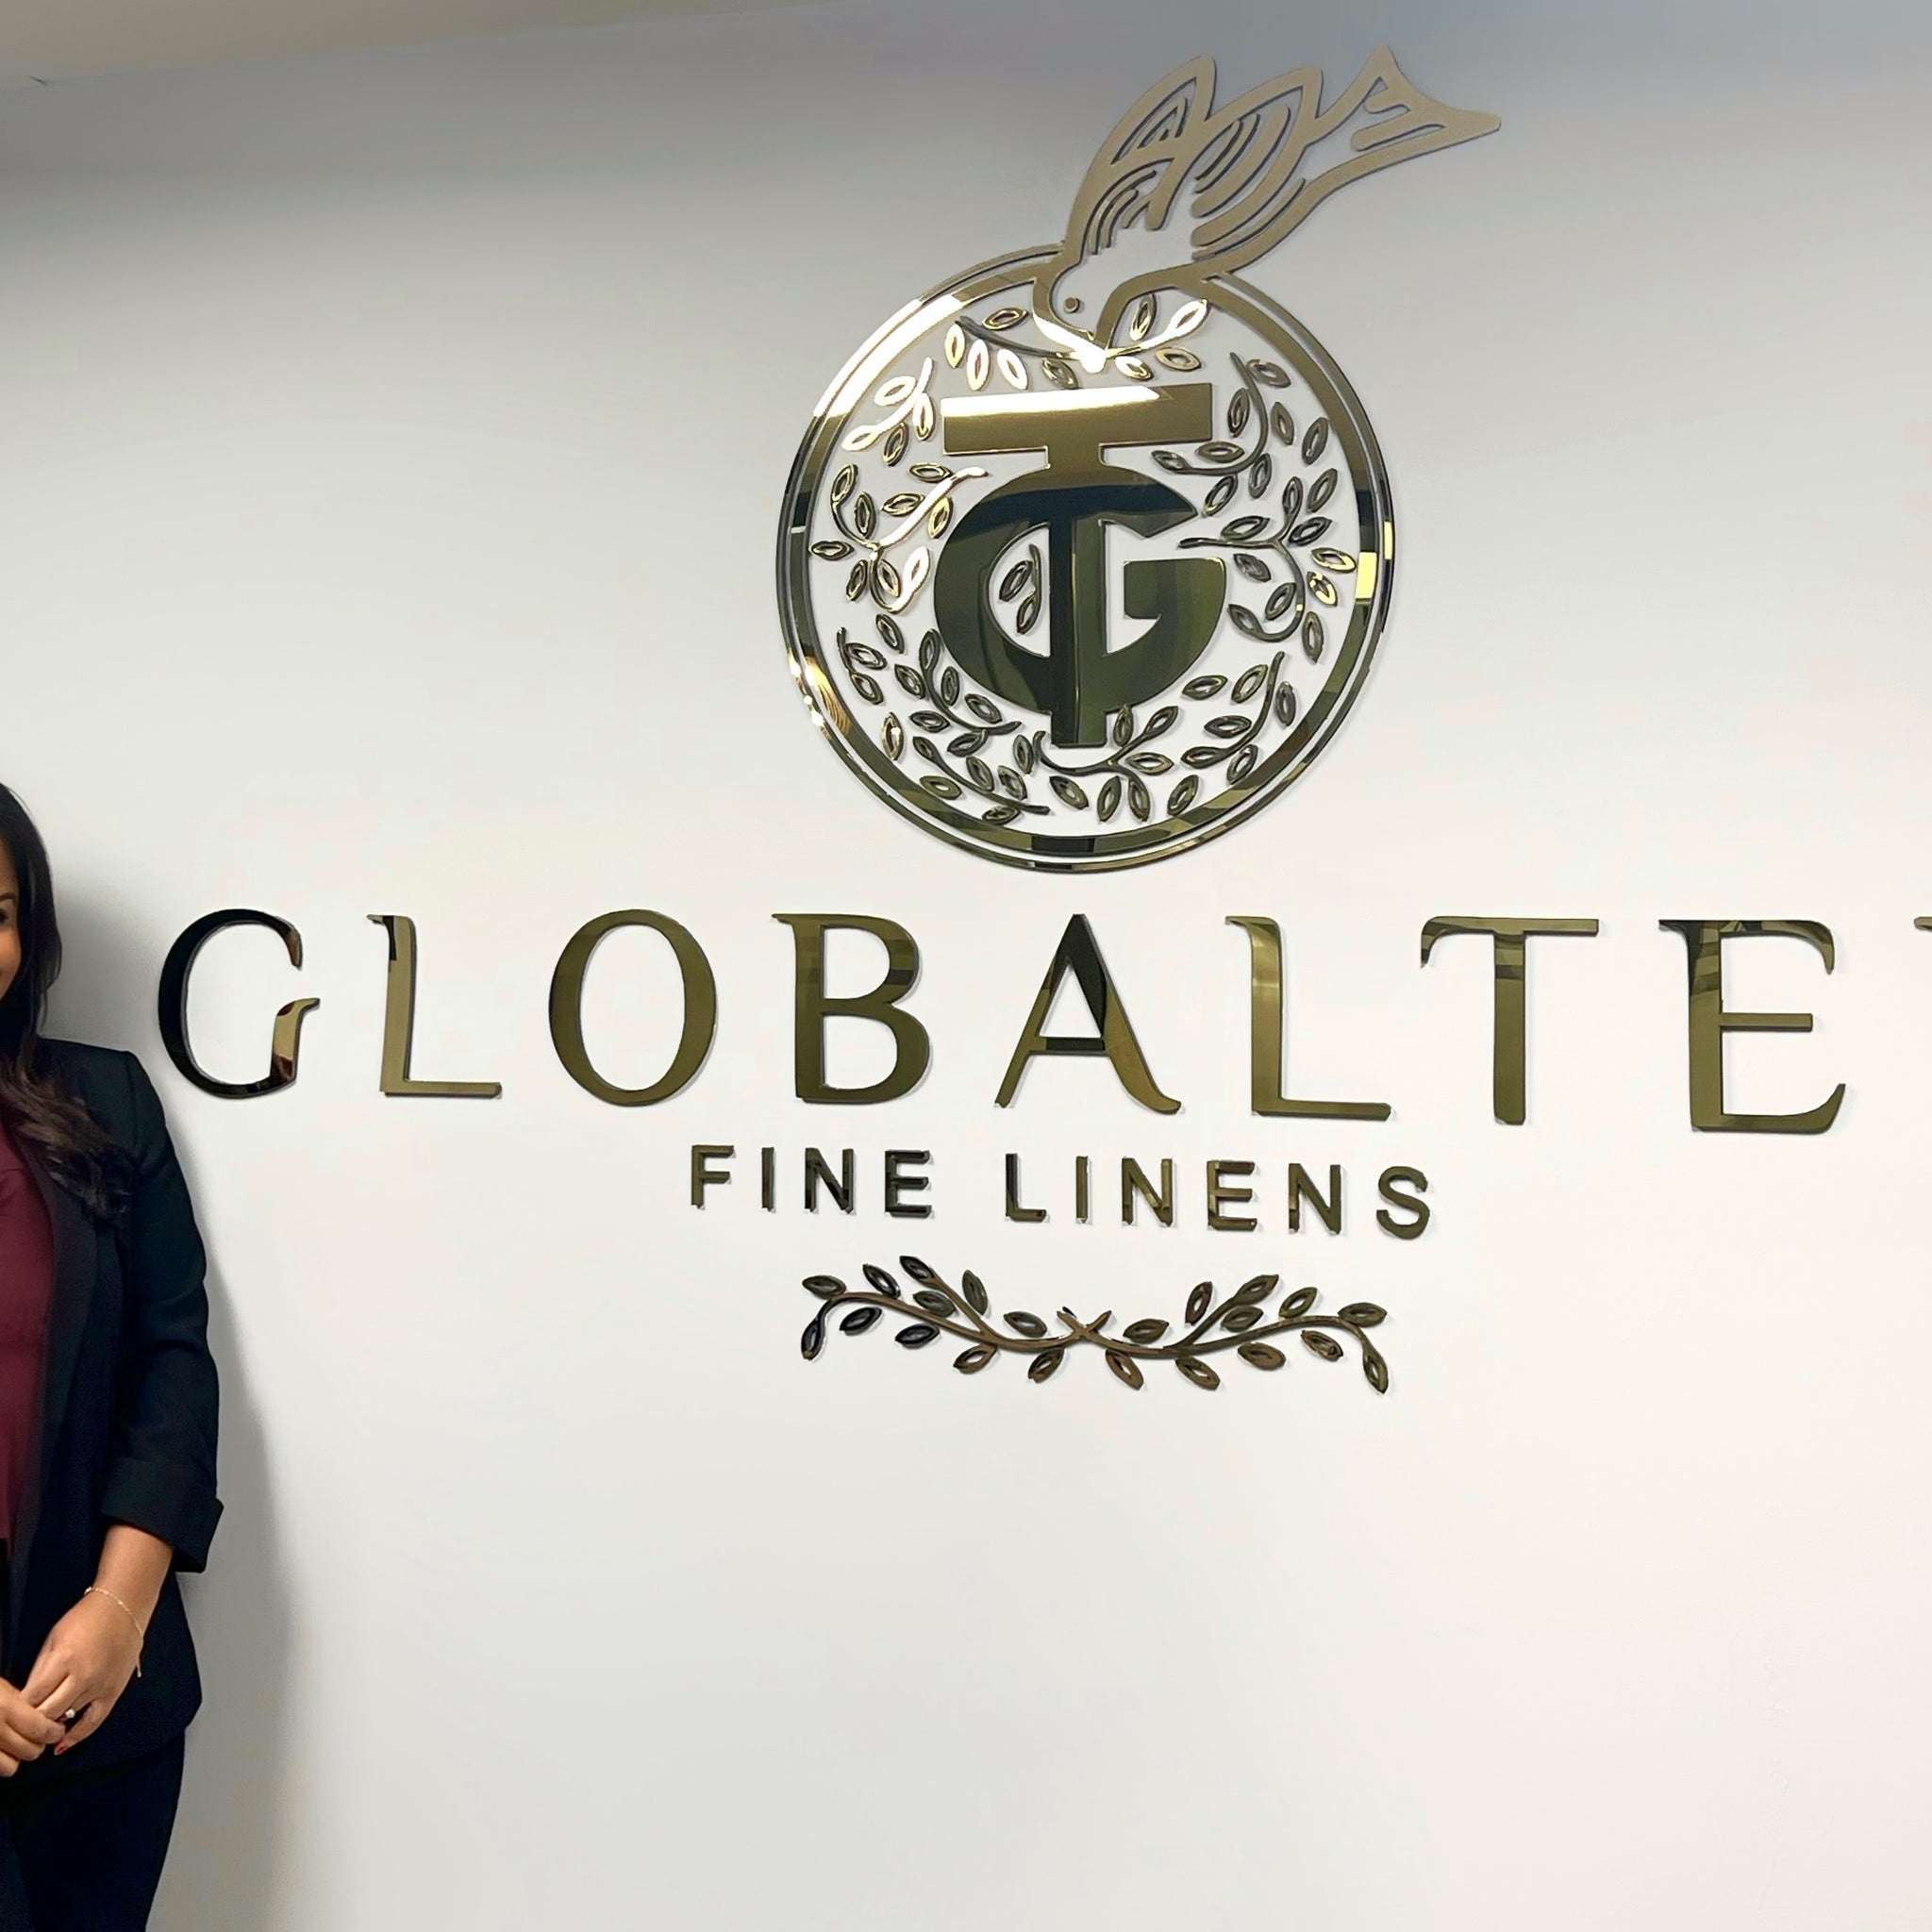 Globaltex Fine Linens Welcomes Paola Alvarez Herrera as the New Human Resources Manager